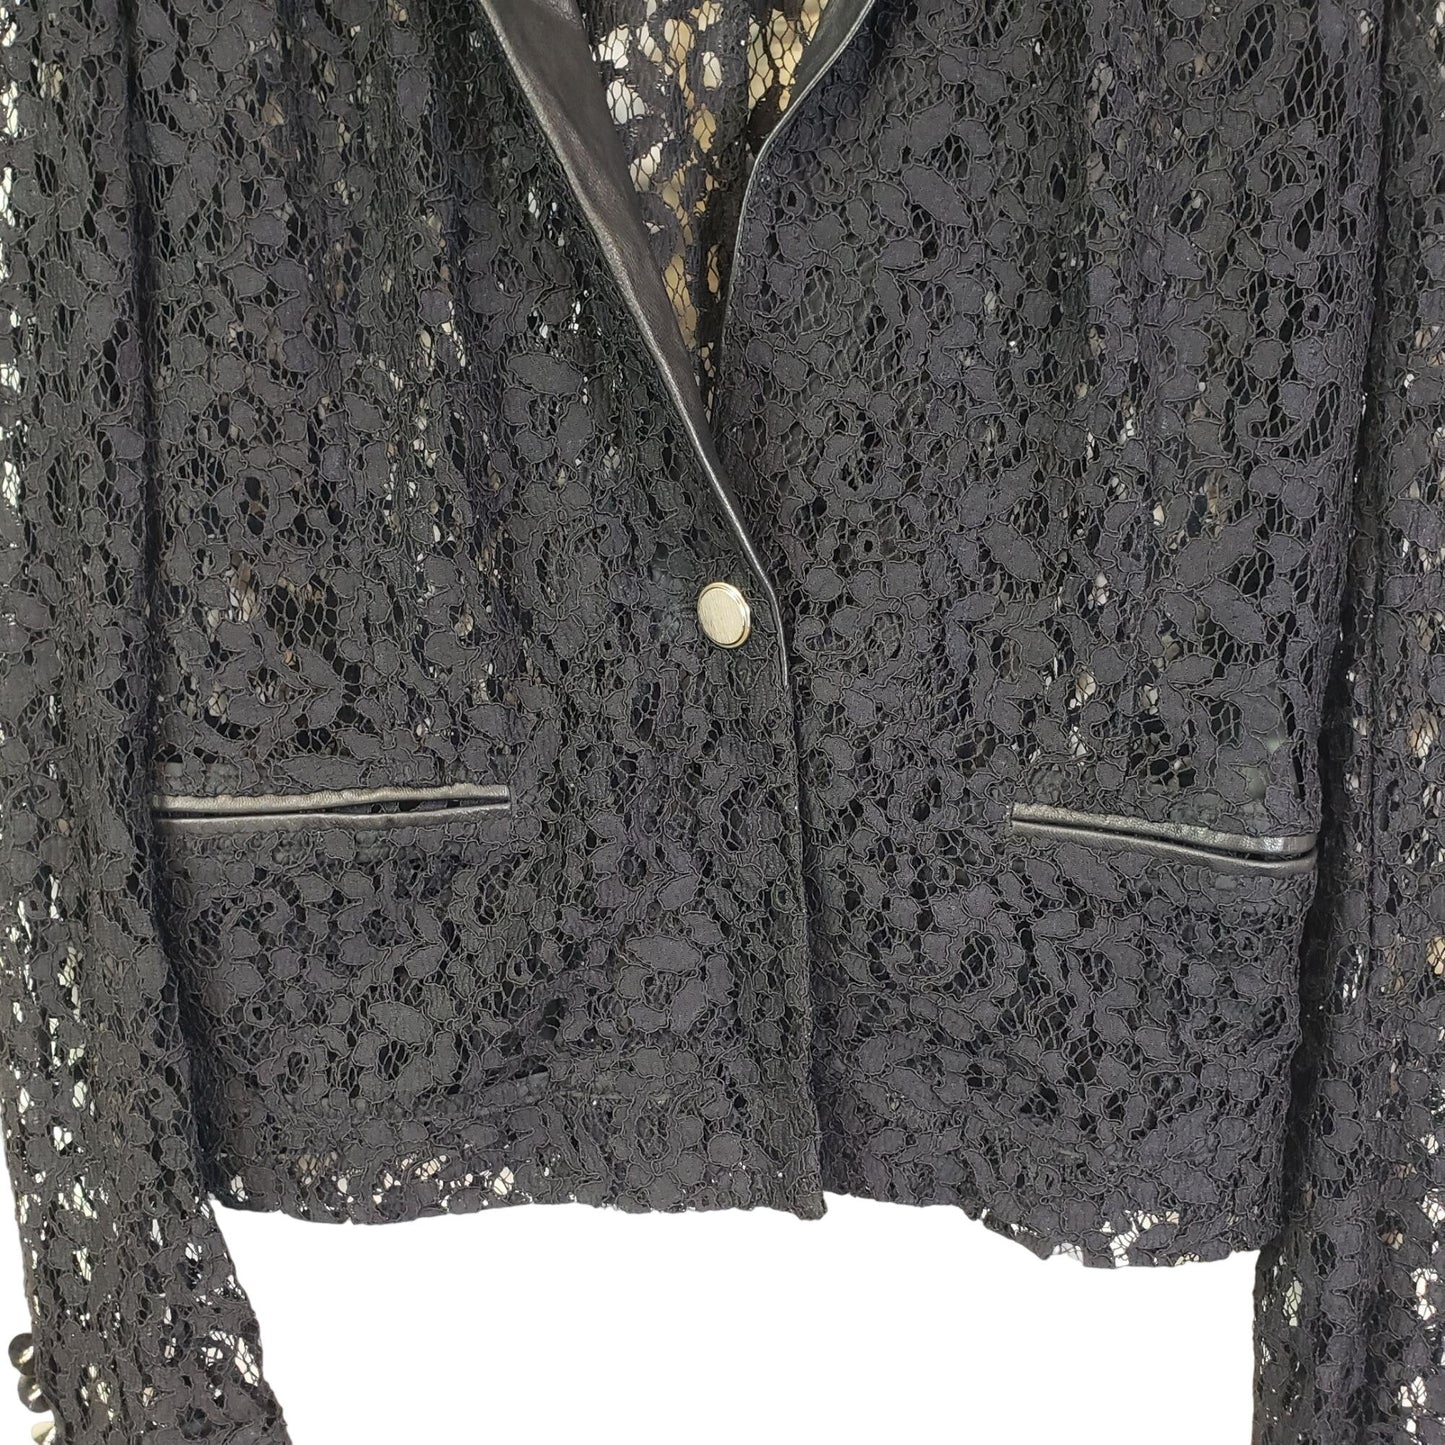 The Kooples Sheer Lace One Button Blazer w/Leather Trim Size M/L